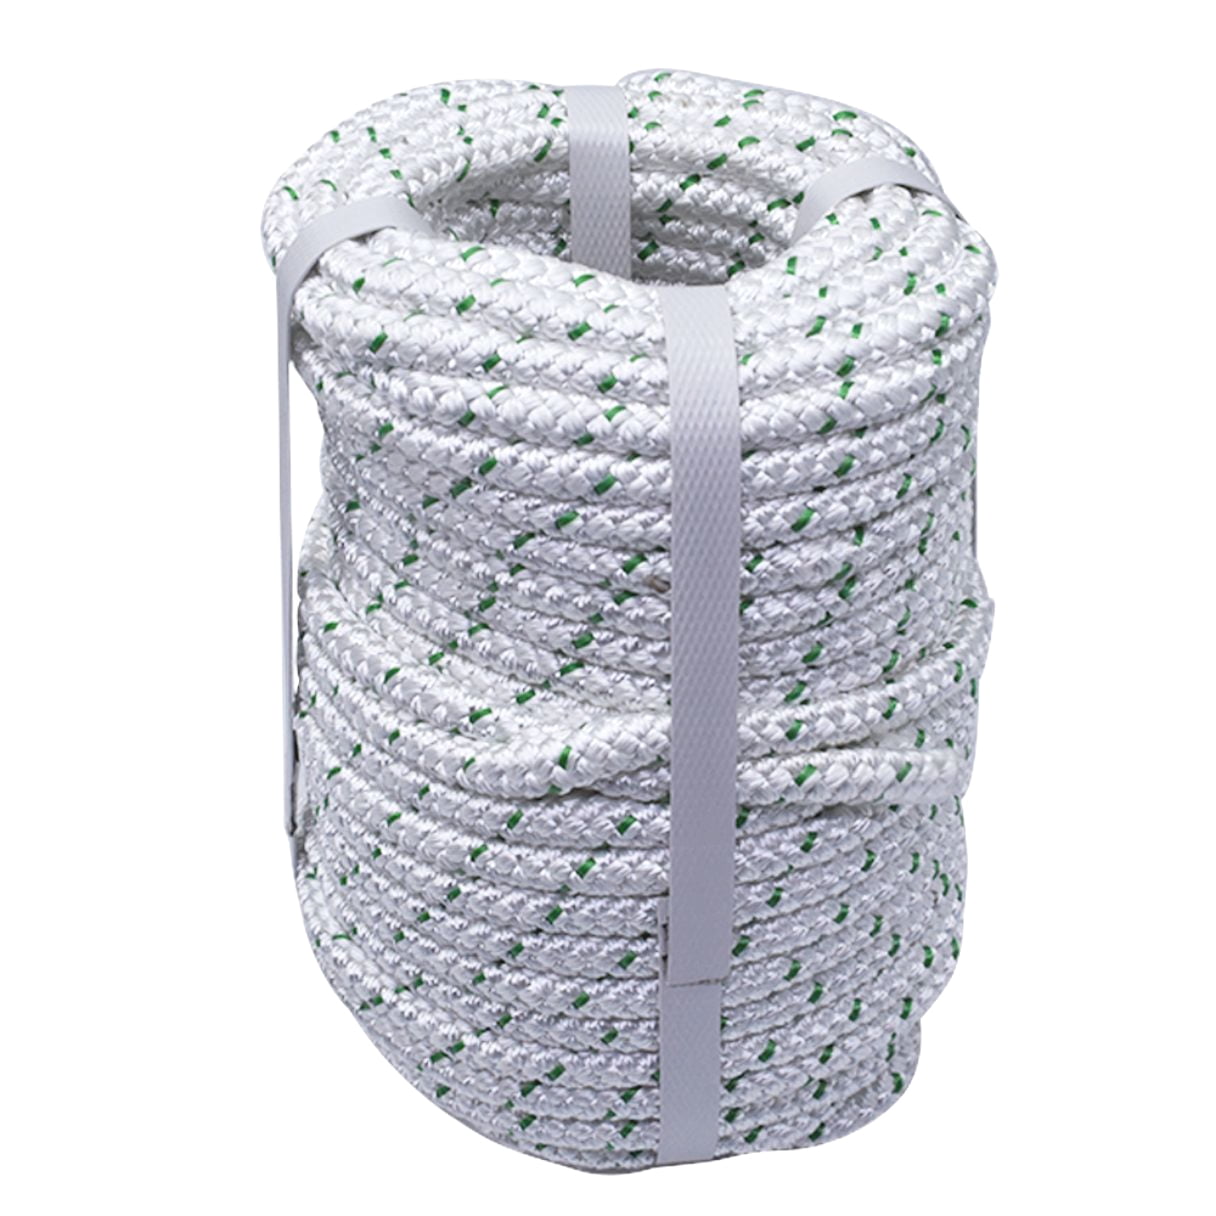 4mm x 100 metres WHITE SOLID BRAIDED STARTER ROPE marine boat yacht engine deck 